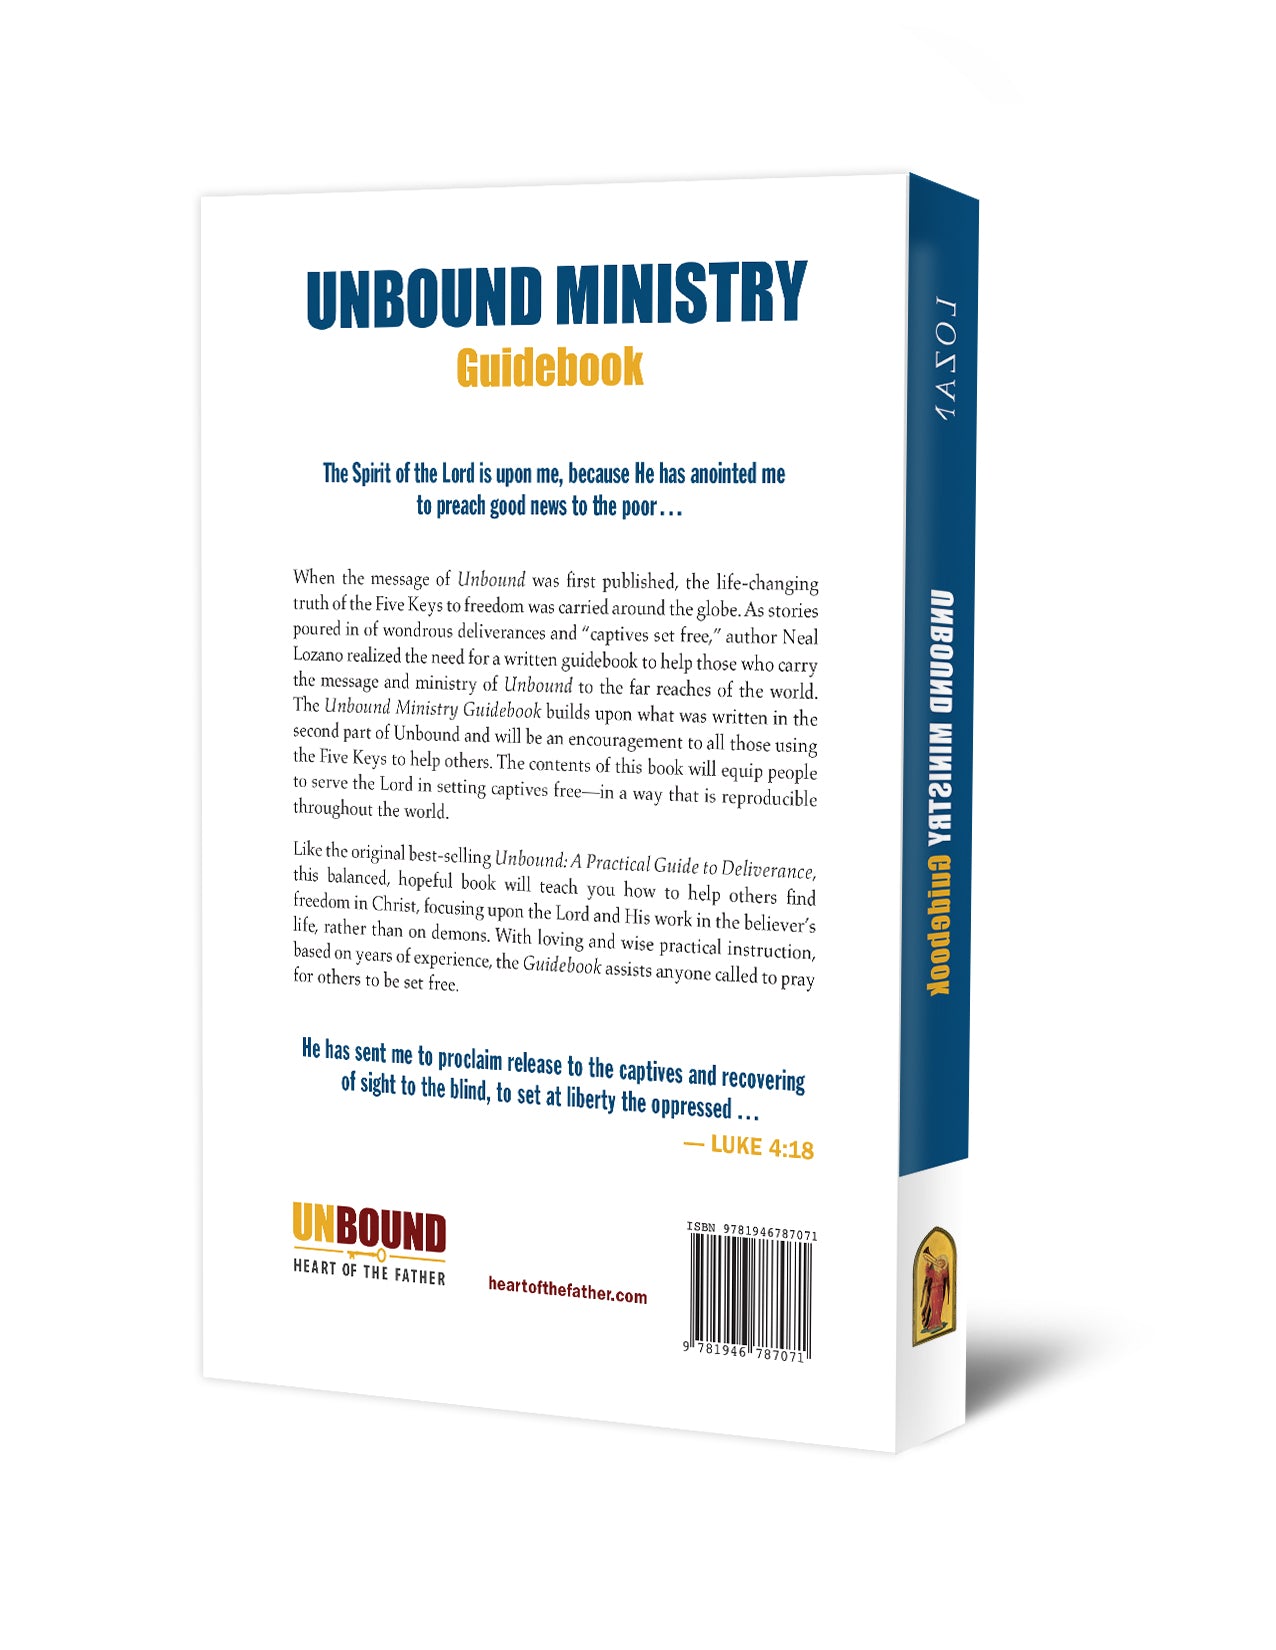 New edition! Unbound Ministry Guidebook: Helping Others Find Freedom in Christ